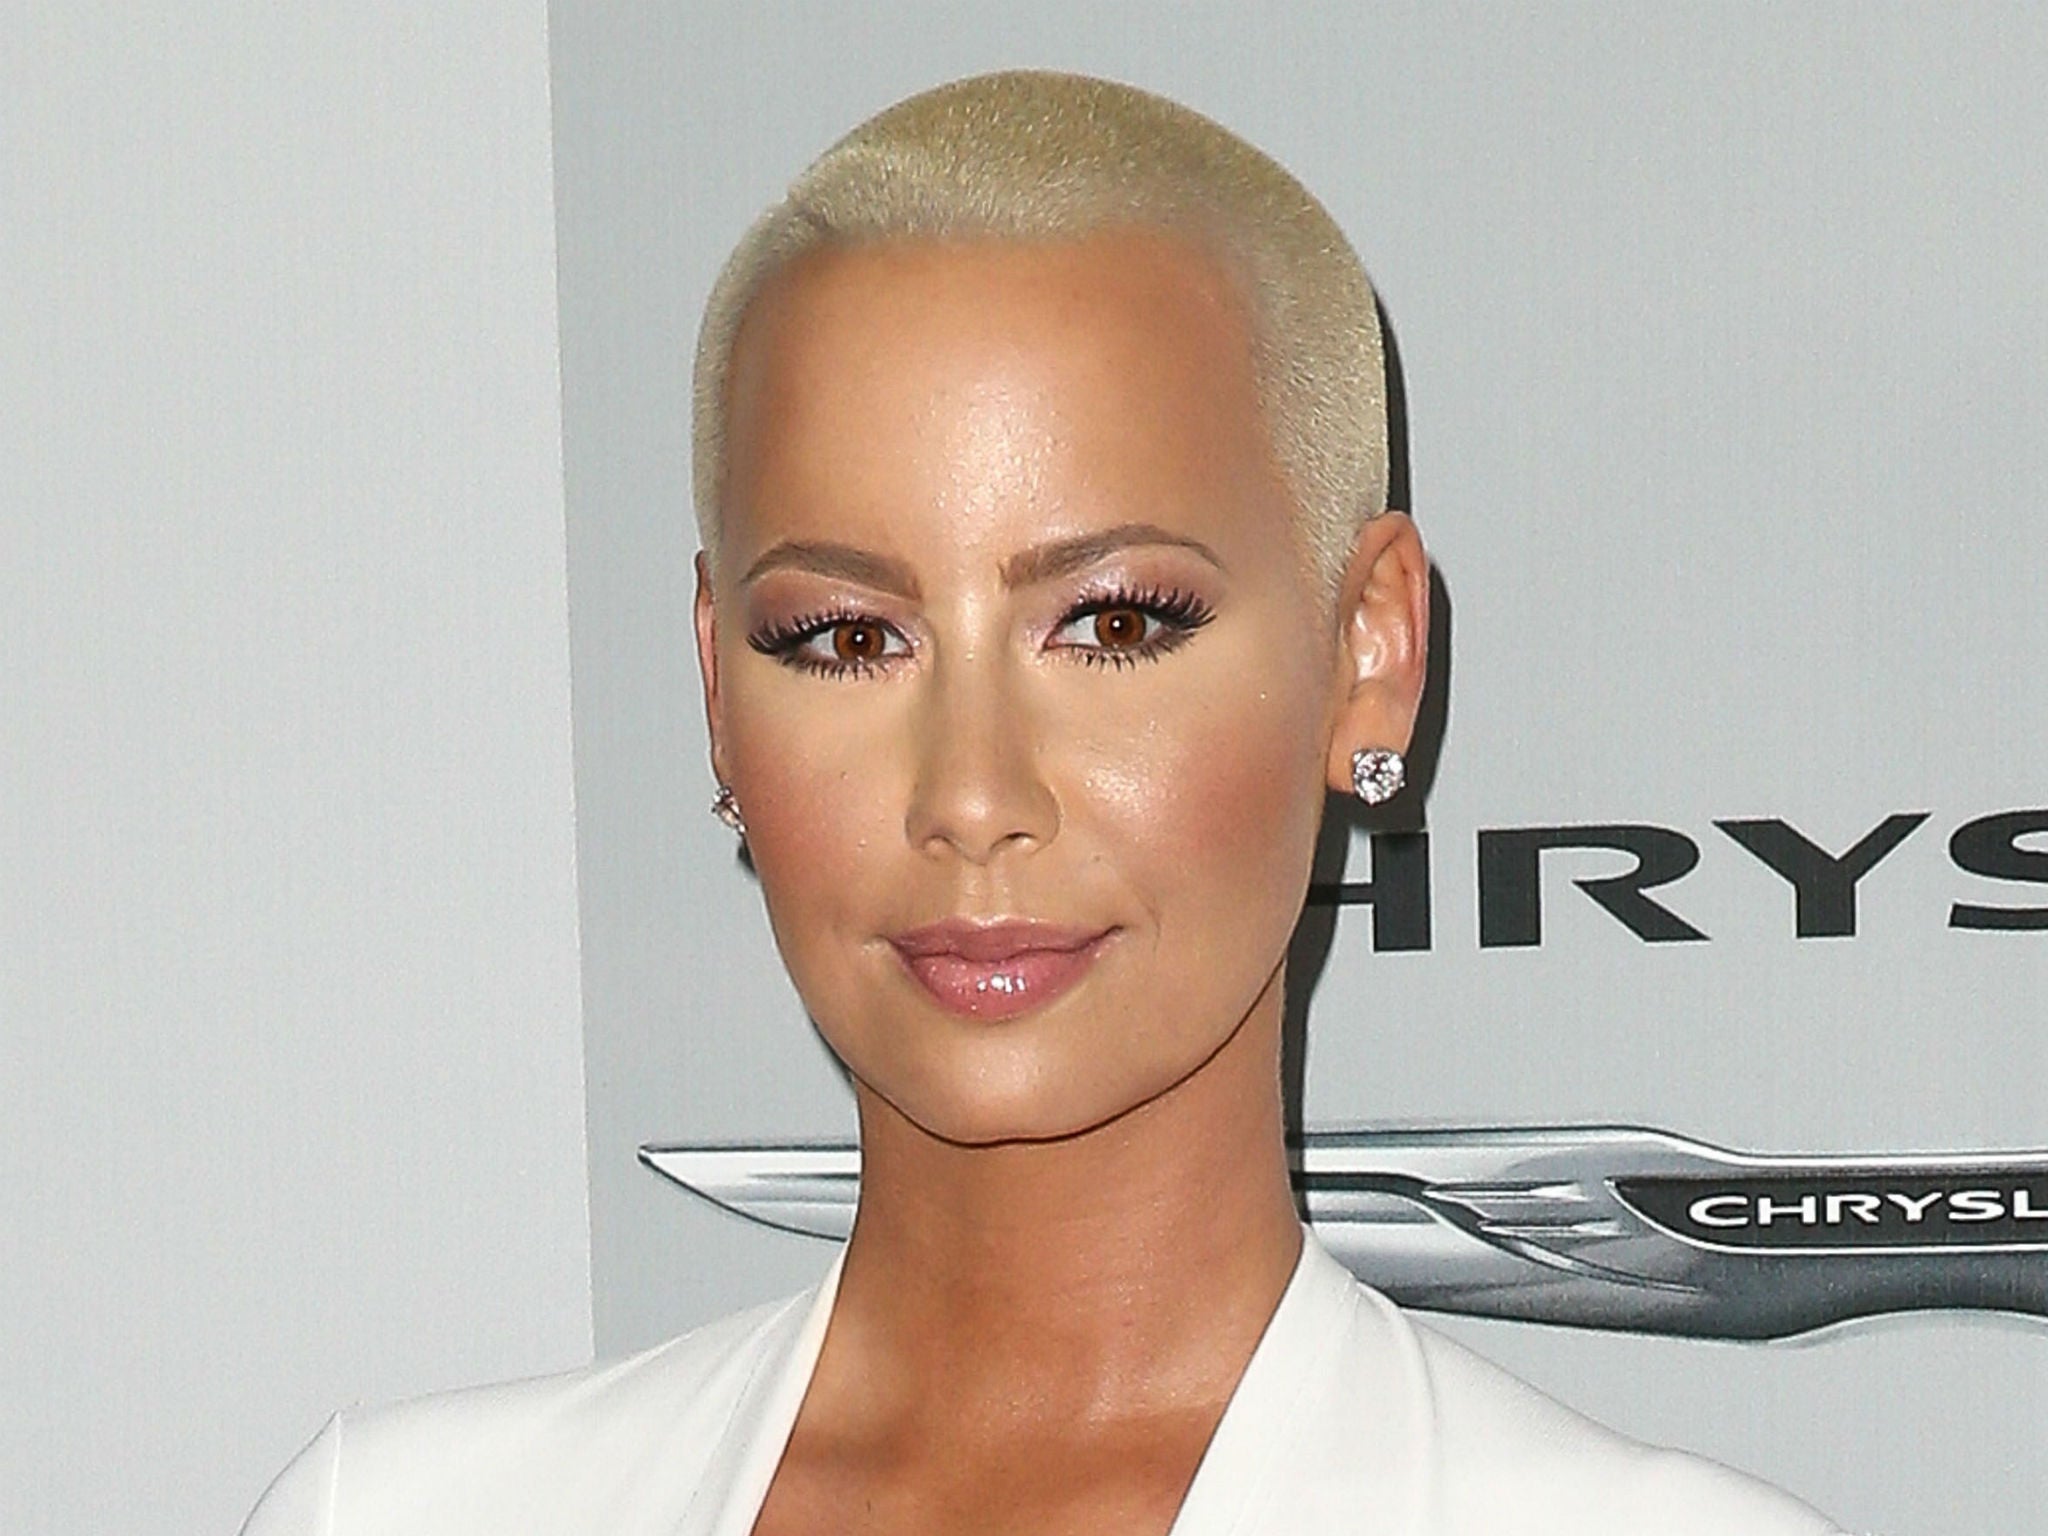 Amber Rose Who is the model and feminist campaigner? The Independent The Independent